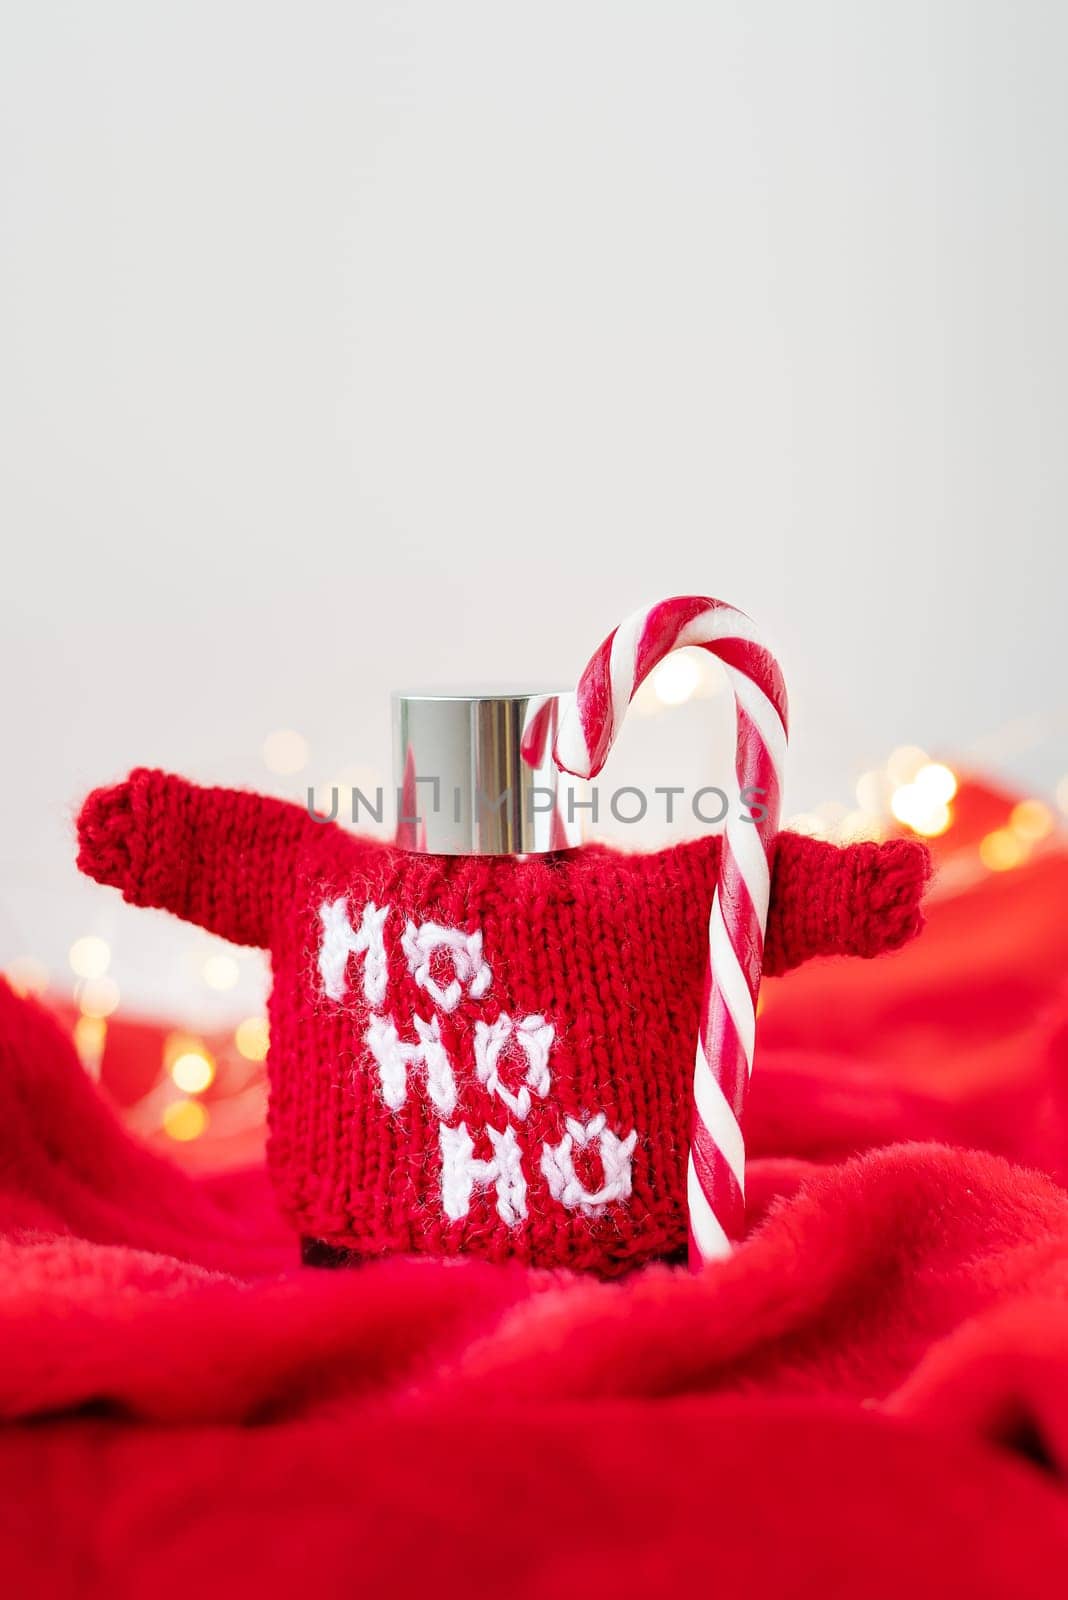 This is a. photo of a red sweater with Ho Ho Ho written on it, wrapped around a silver flask with a candy cane sticking out of it. The background is blurred with Christmas lights and a red blanket